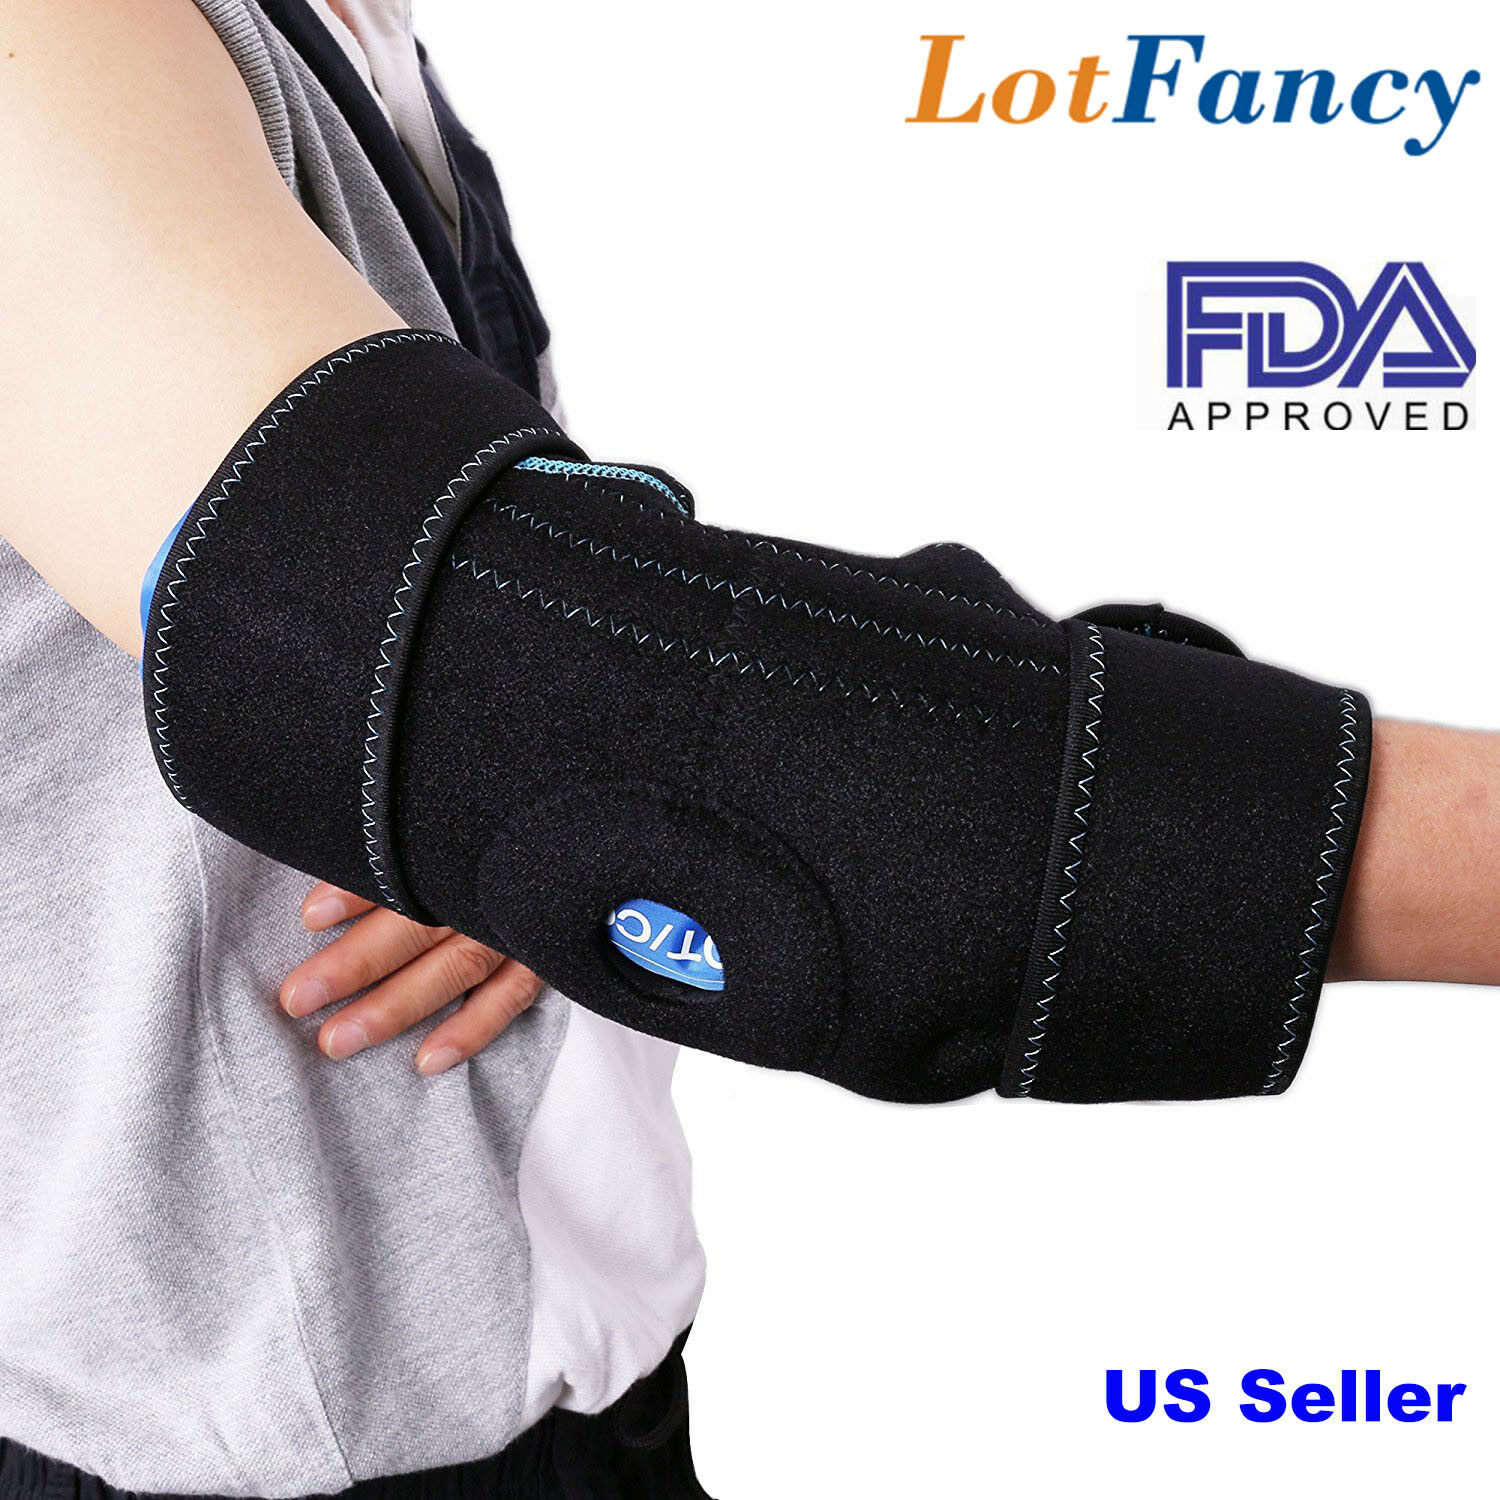 Arm Elbow Ice Pack Support Sleeve Wrap Brace Cold Hot Thermal Therapy Injuries